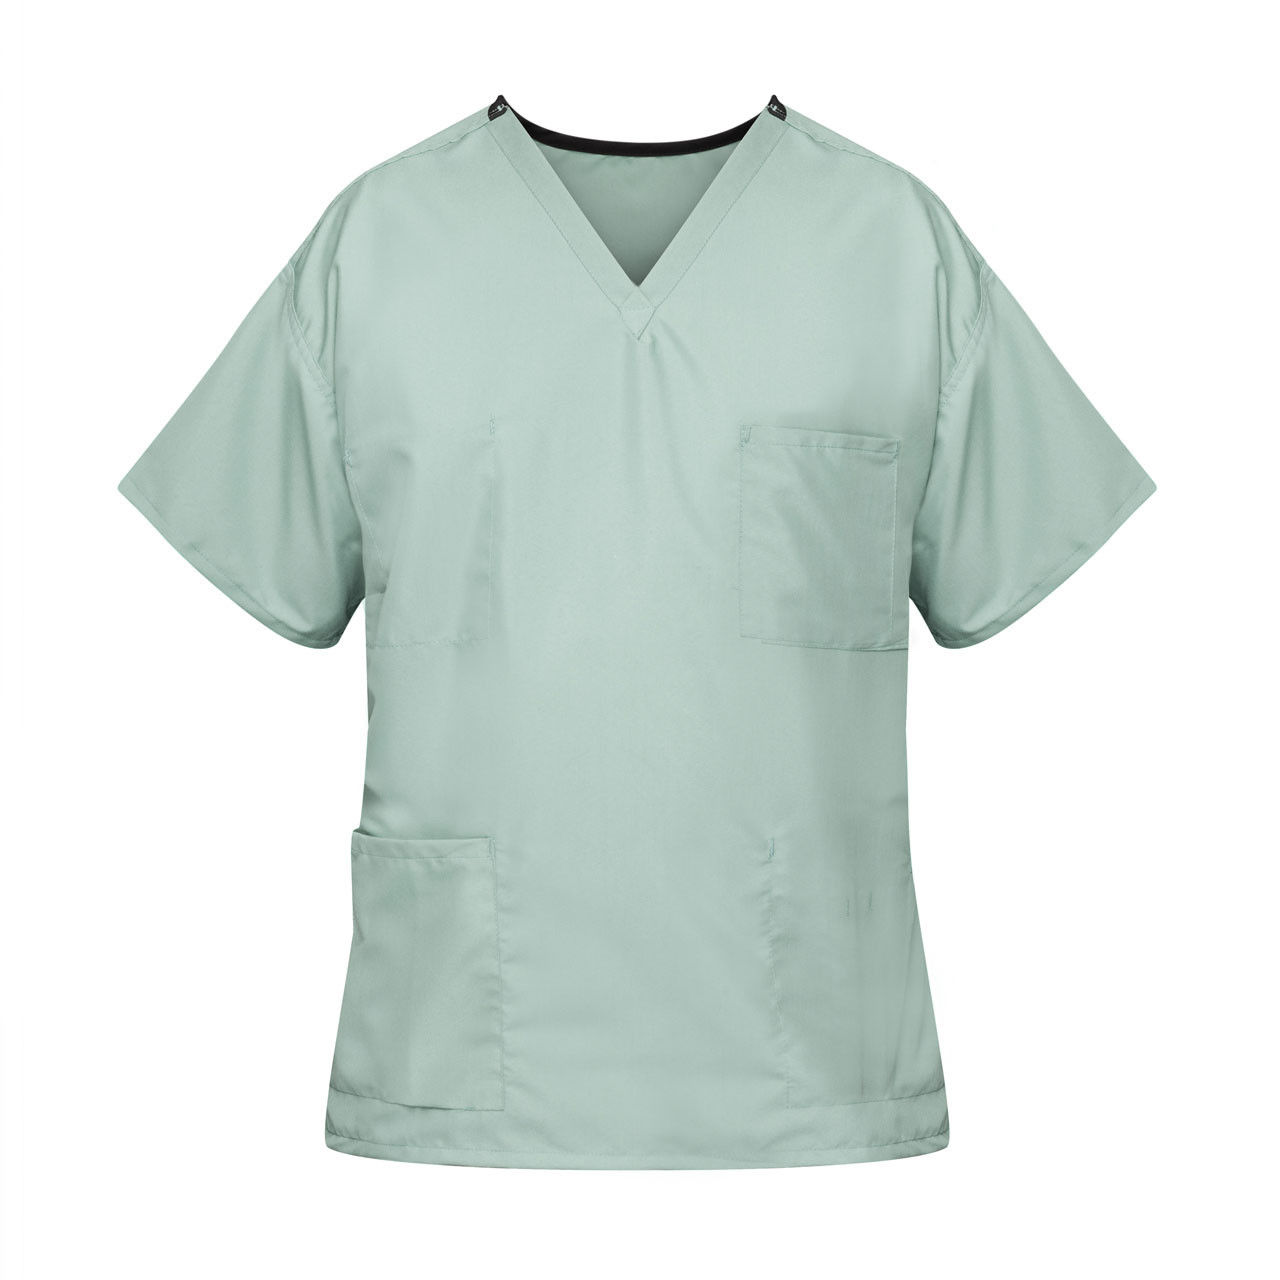 Who can wear these misty green scrubs?